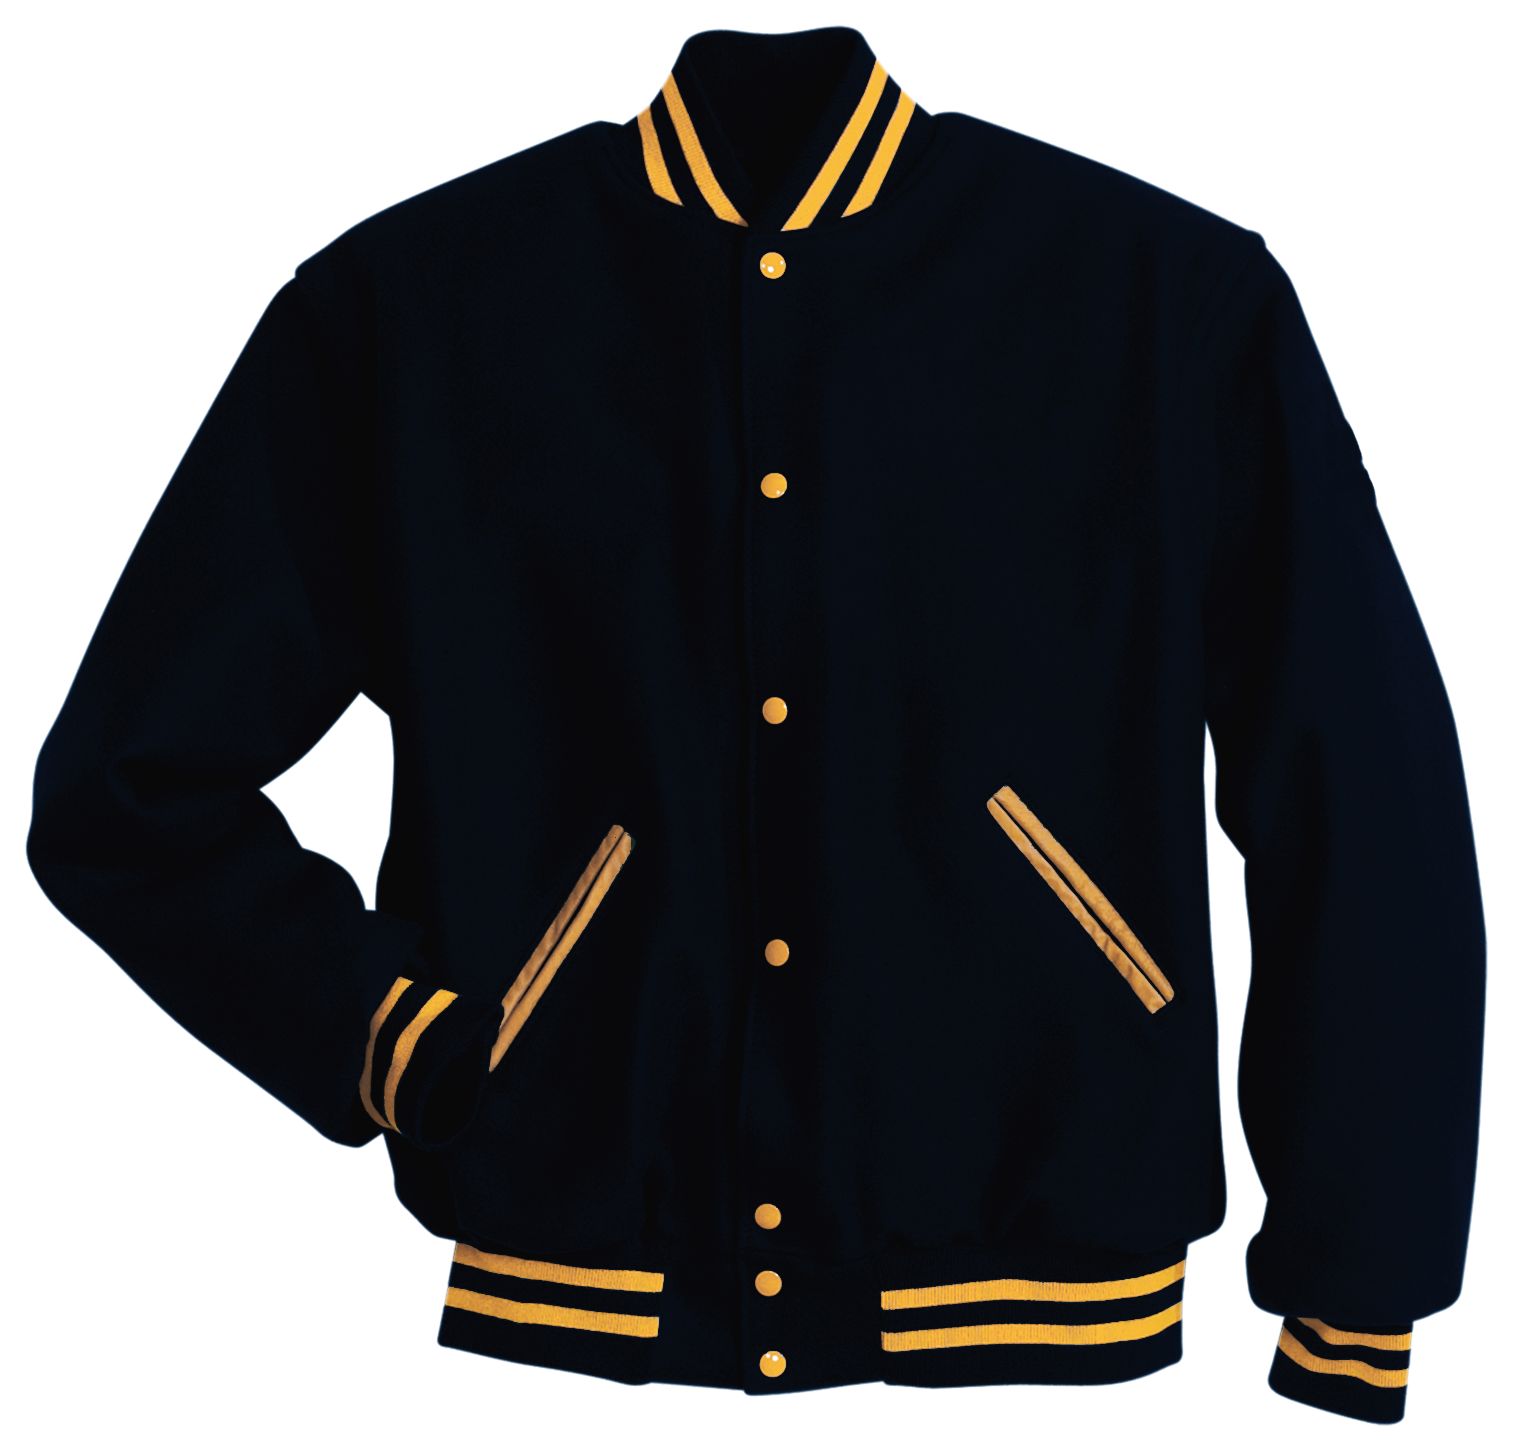 Selected Color is DARK NAVY/LIGHT GOLD